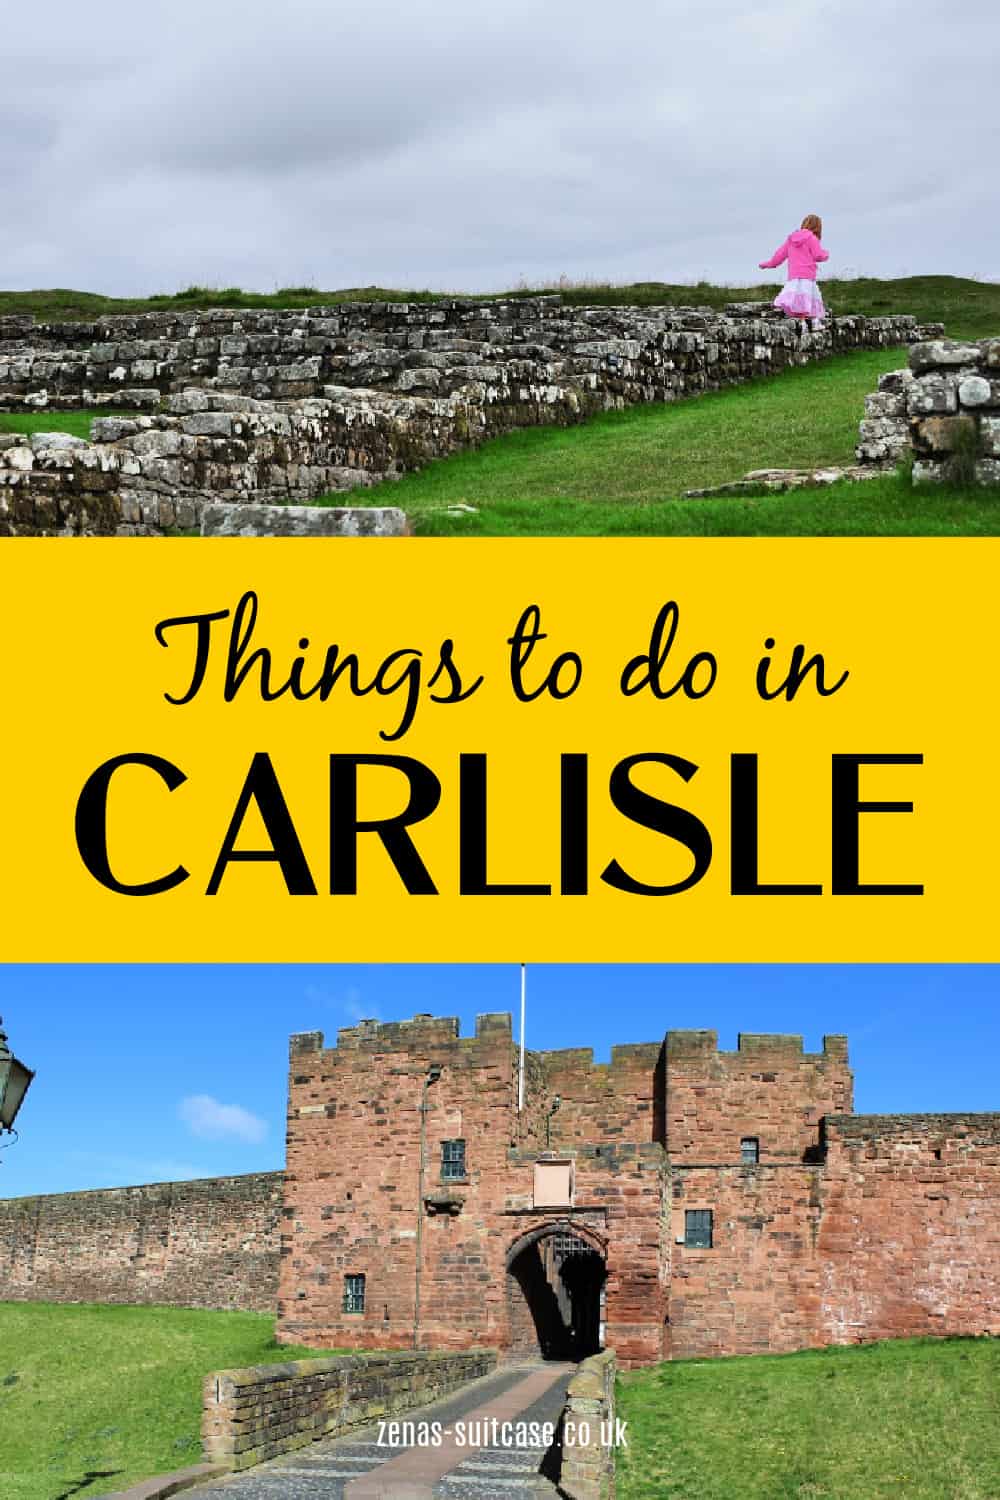 Things to do in Carlisle